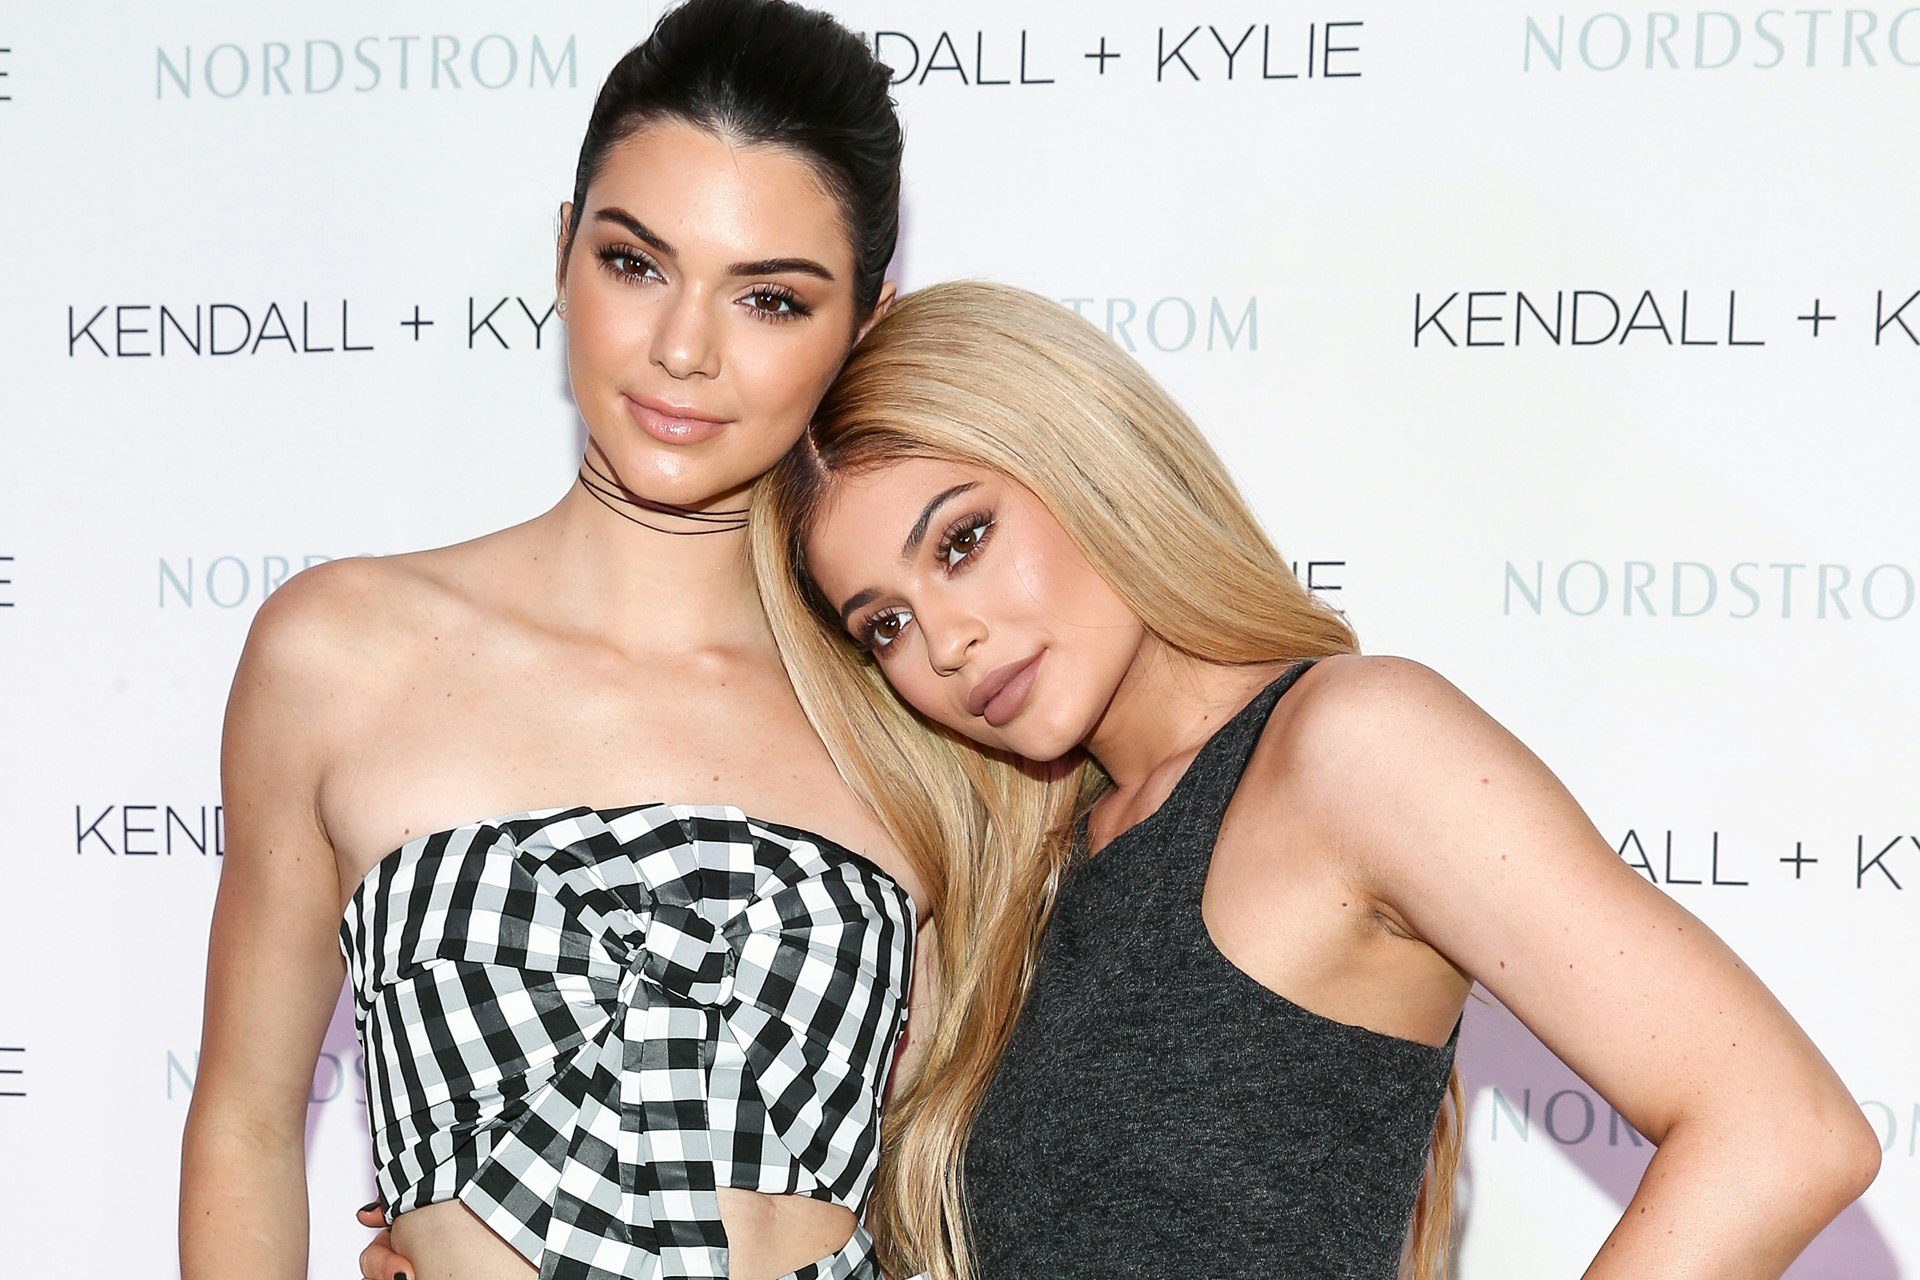 Kendall And Kylie Jenner Show Off Their New Fashion Line